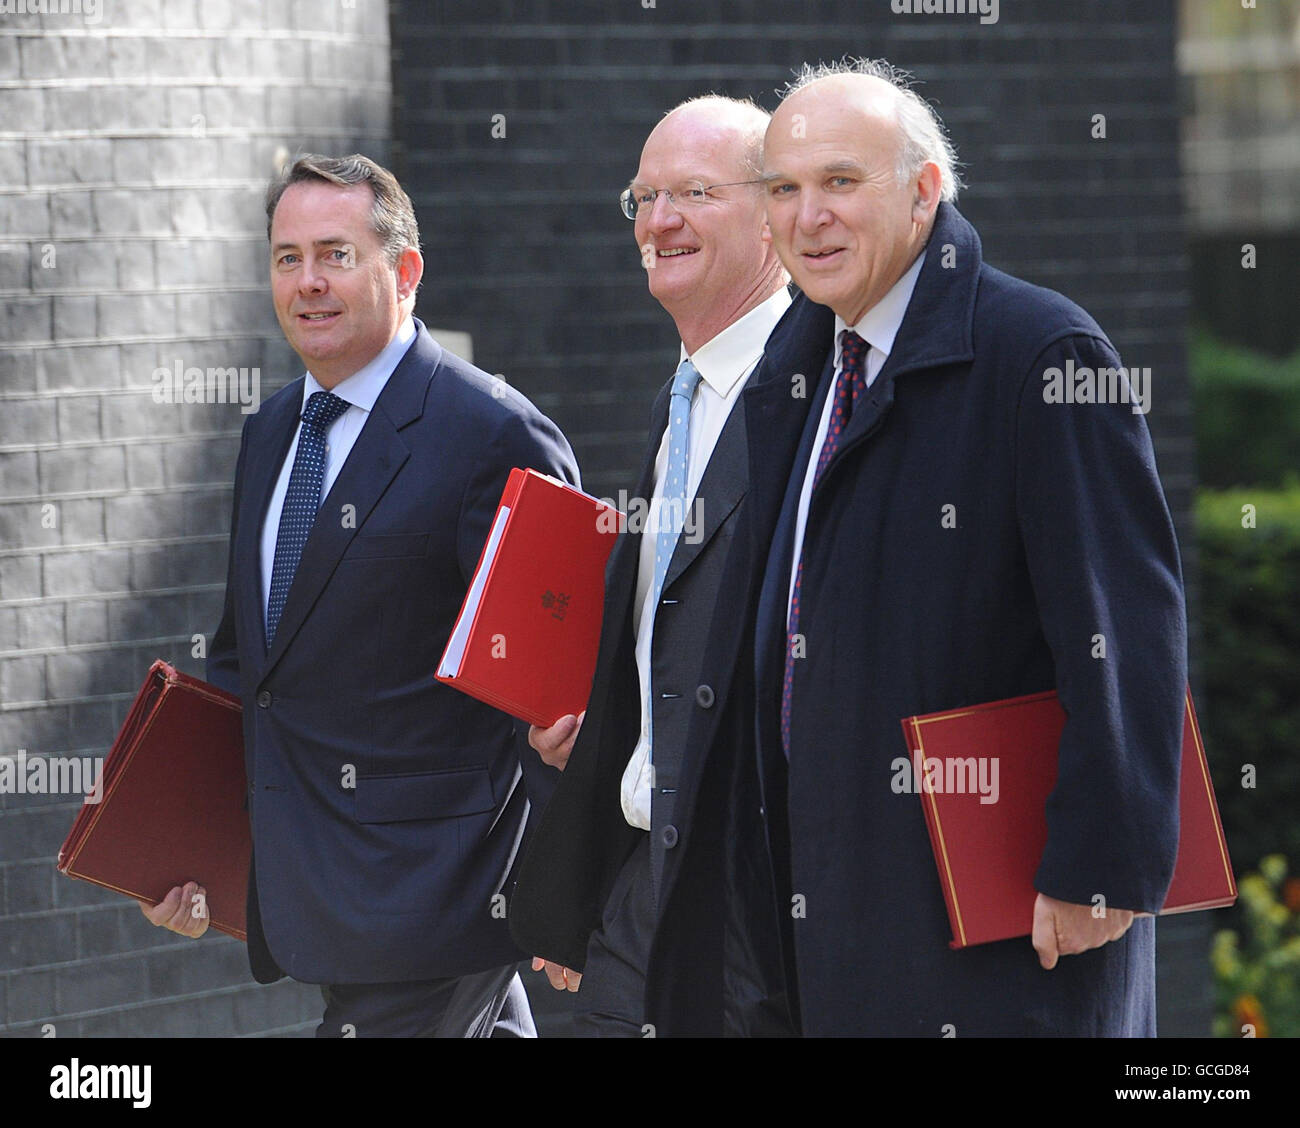 Defence Secretary Liam Fox (left), Minister of State (Universities and Science) - Department for Business, Innovation and Skills David Willetts (centre) and Business, Innovation and Skills Secretary Vince Cable arrive at 10 Downing Street for the first Cabinet meeting of the new coalition government. Stock Photo